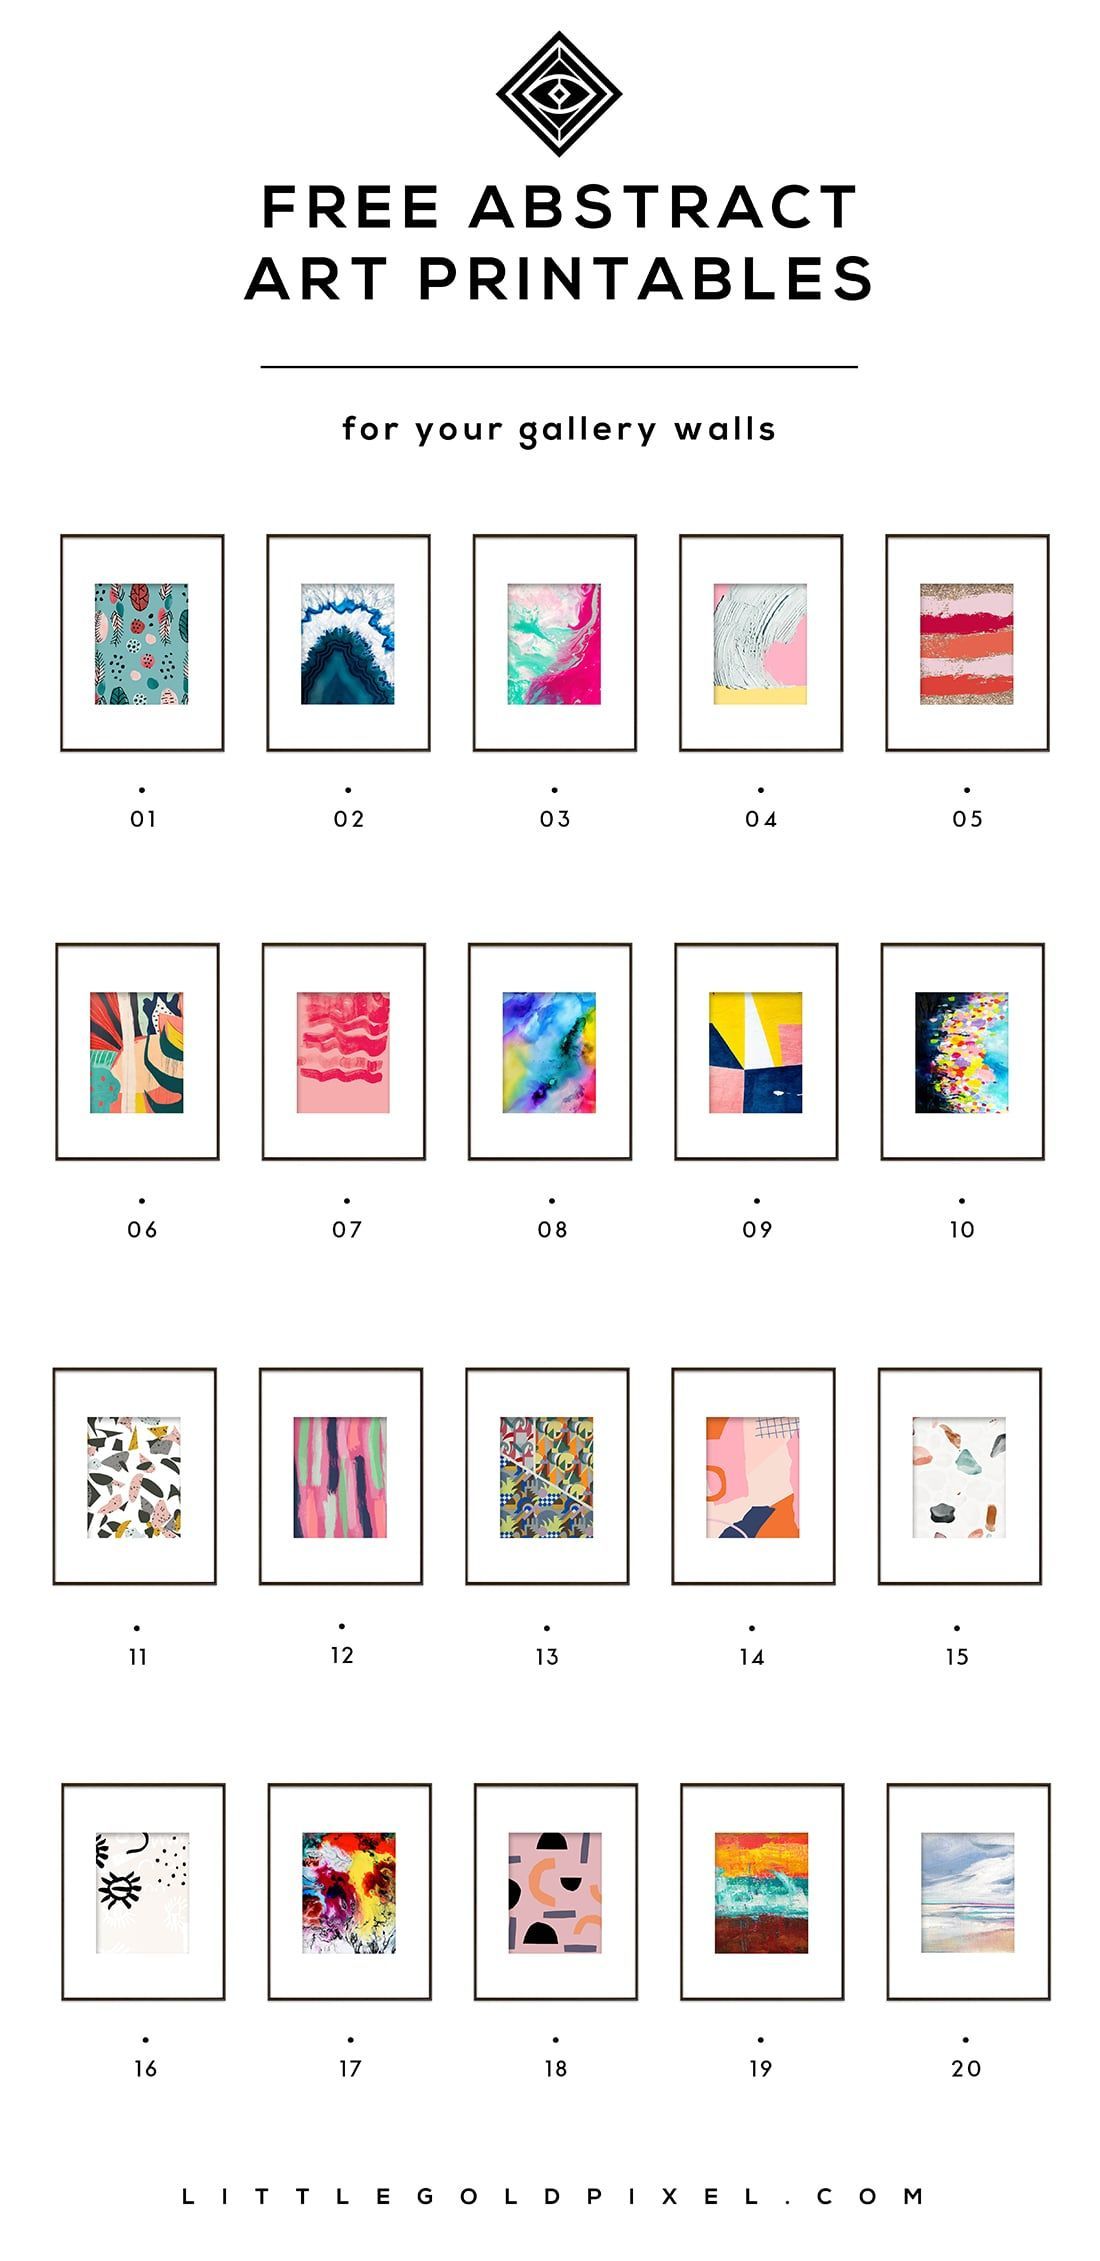 20 Free Abstract Art Printables for Your Gallery Walls • Little Gold Pixel - 20 Free Abstract Art Printables for Your Gallery Walls • Little Gold Pixel -   diy Art prints